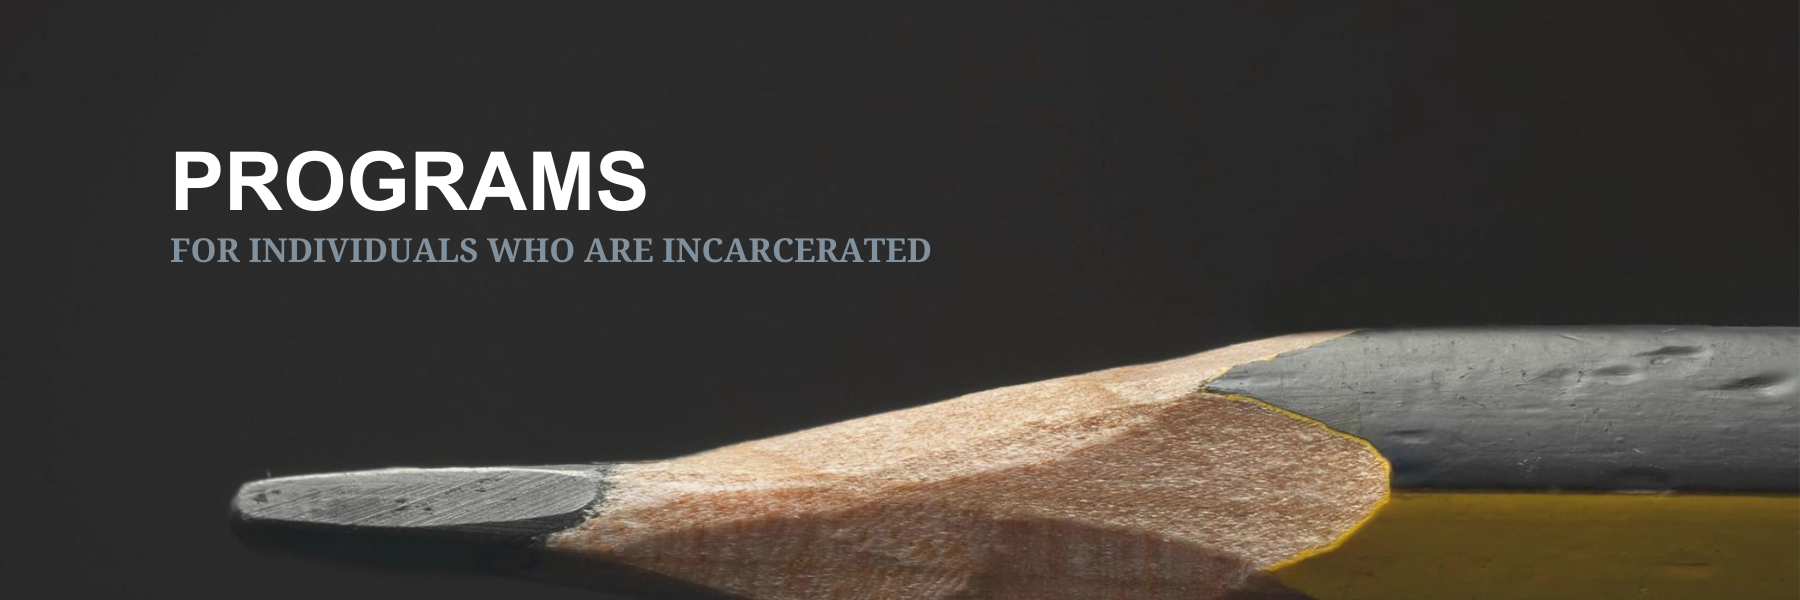 Programs for the incarcerated